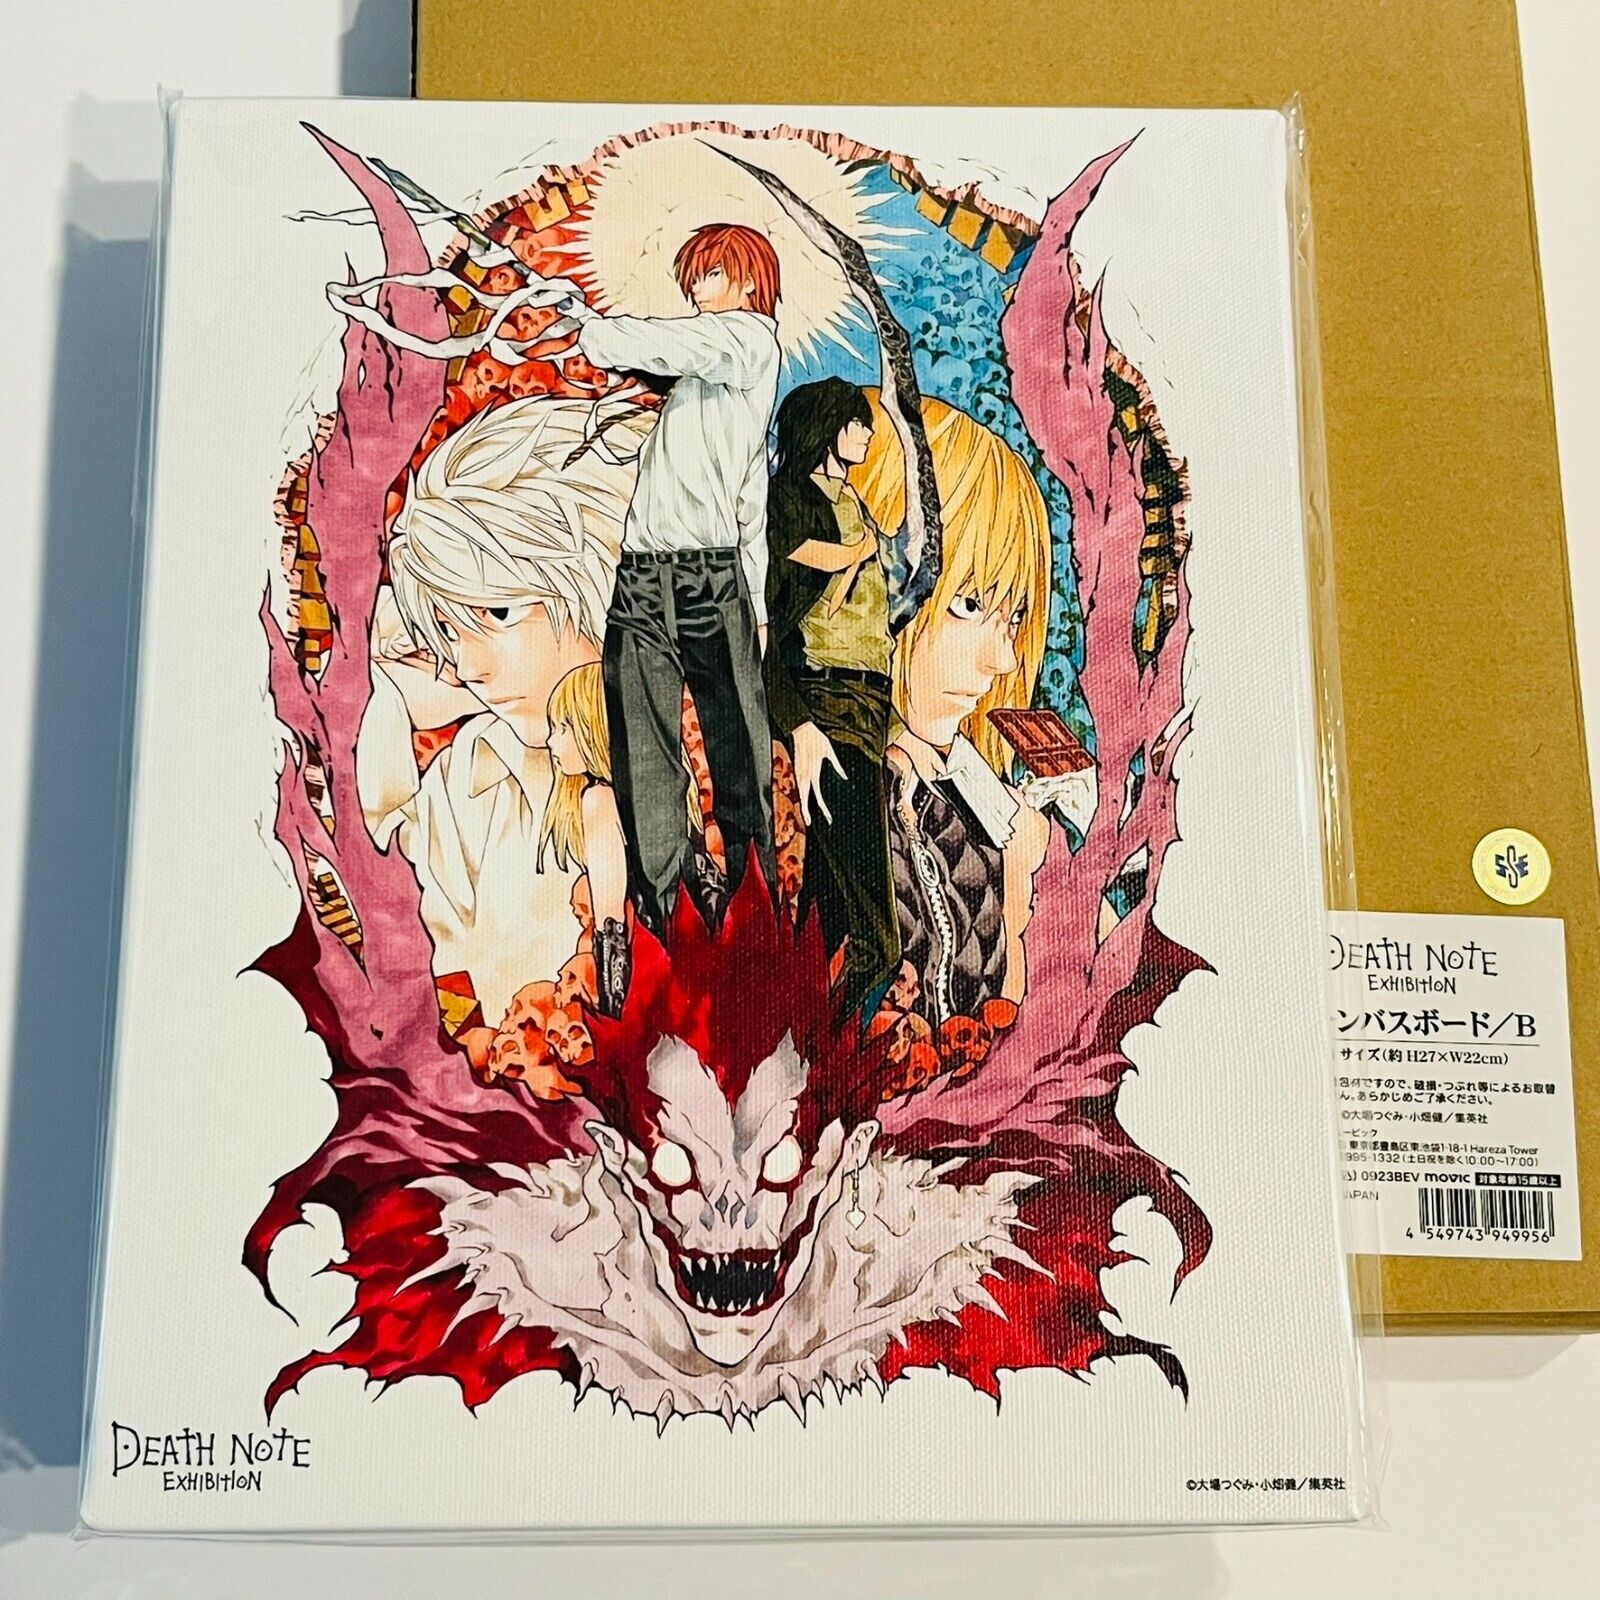 Death Note Exhibition canvas artwork - thick art print from Exhibit *NEW* in box